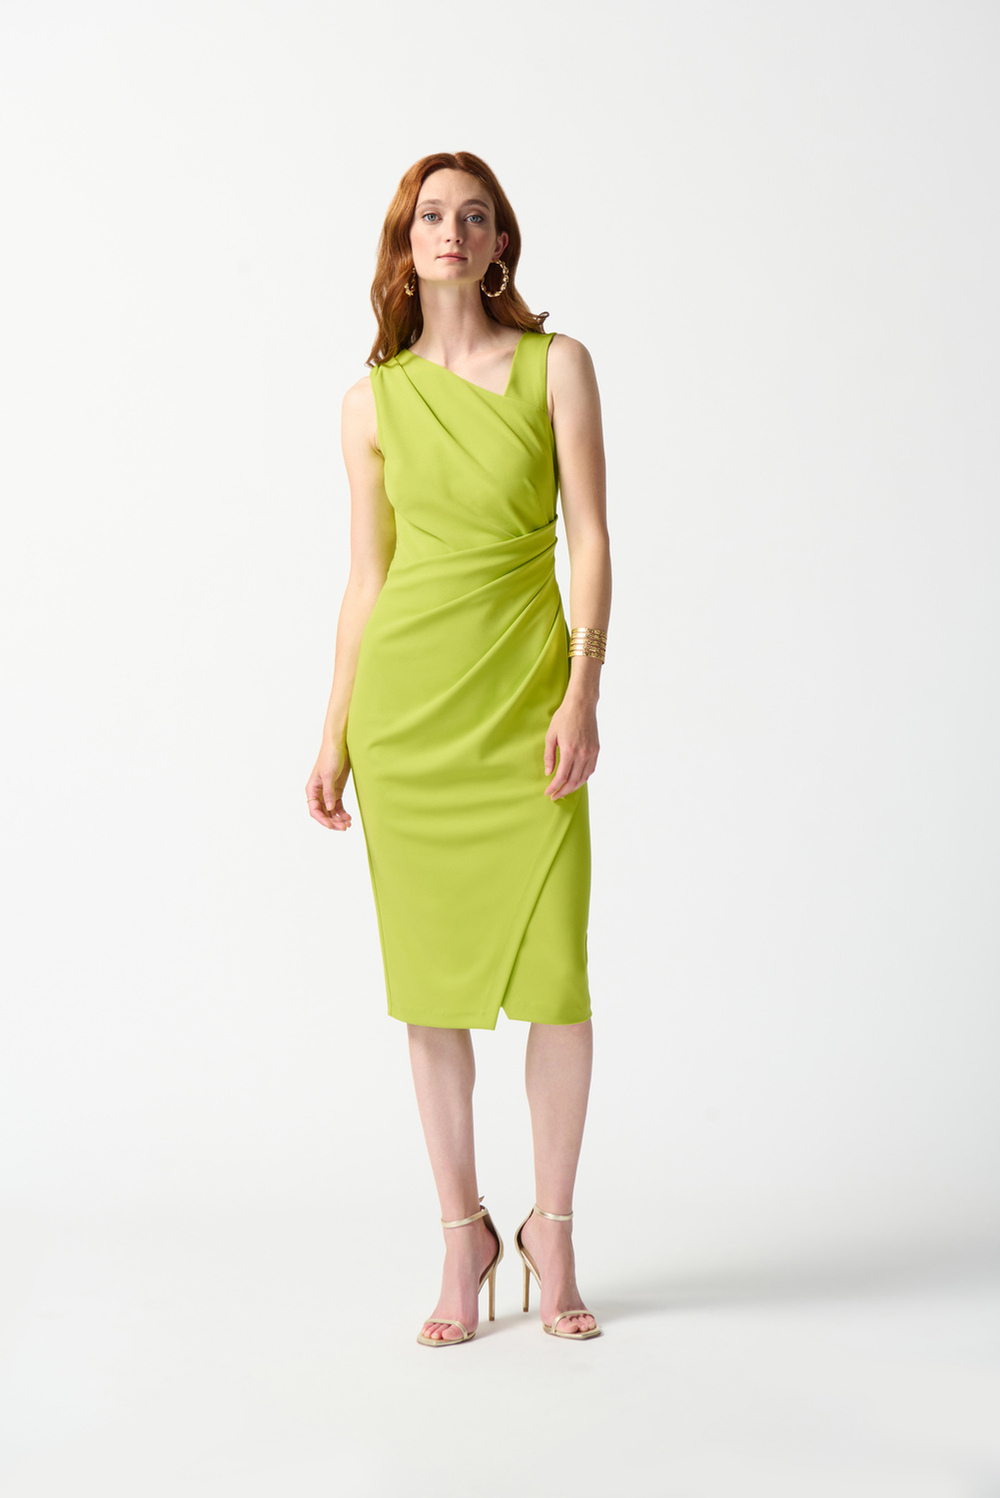 Ruched One-Shoulder Dress Style 242234. Key Lime